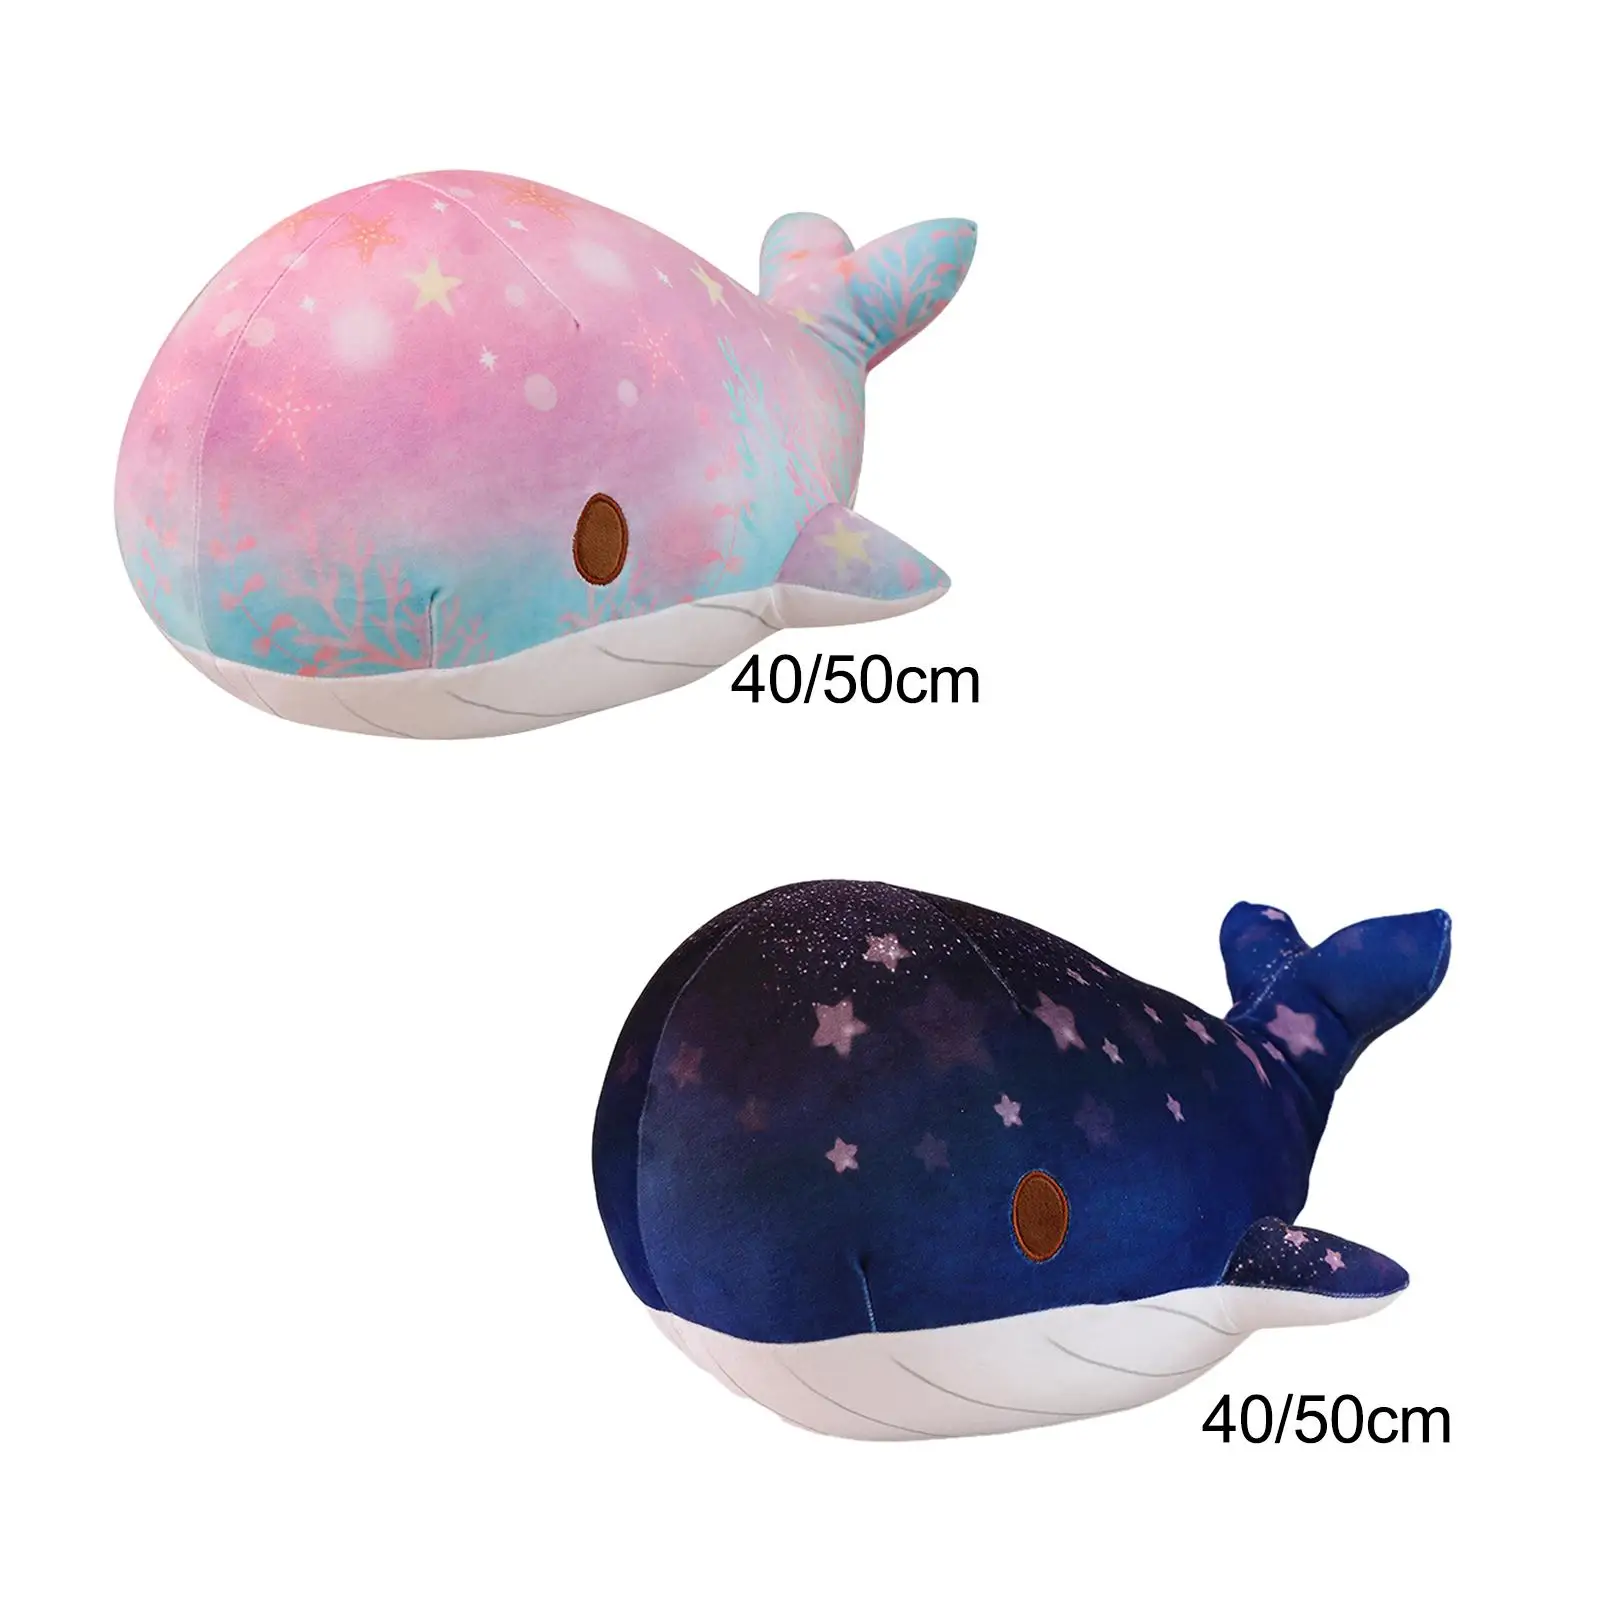 

Starry Sky Whale Doll Lovely Creative Ornament Birthday Gifts Whale Plush Toy Animal Toy for Living Room Couch Bedroom Adults